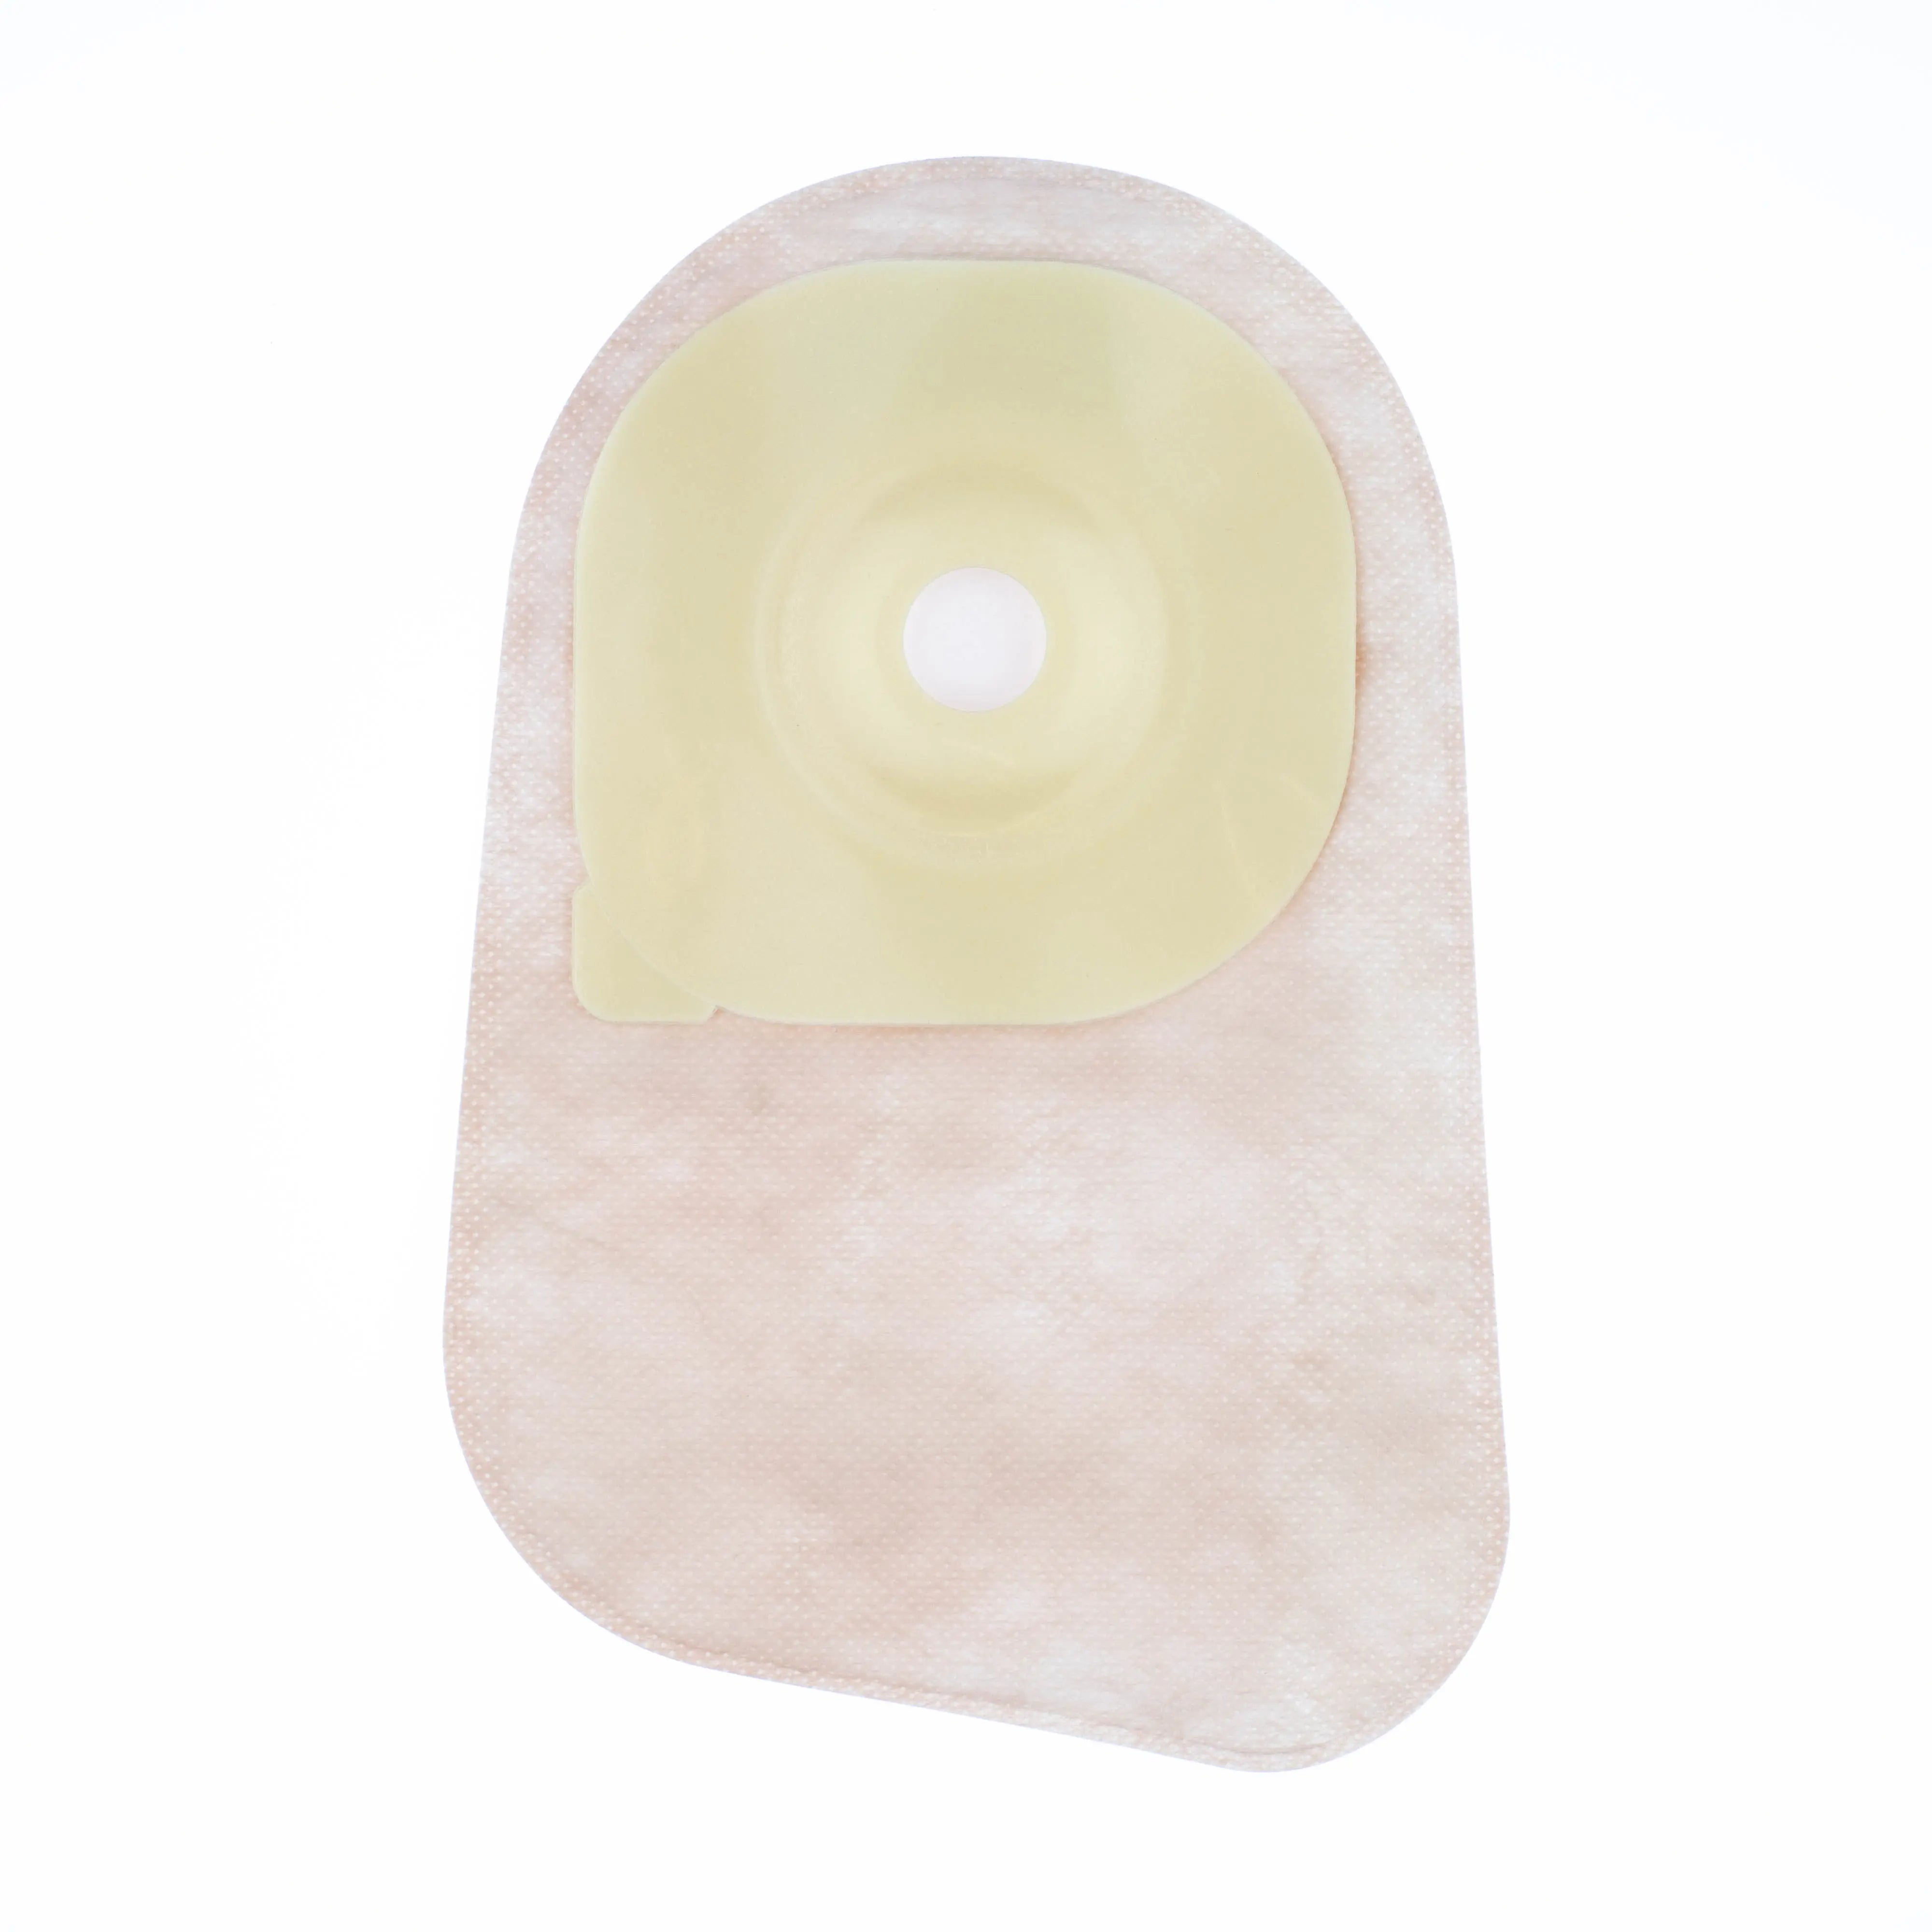 Hollister Premier OnePiece Drainable Ostomy Pouch w Flextend   MeridianMedicalSupplycom  Meridian Medical Supply